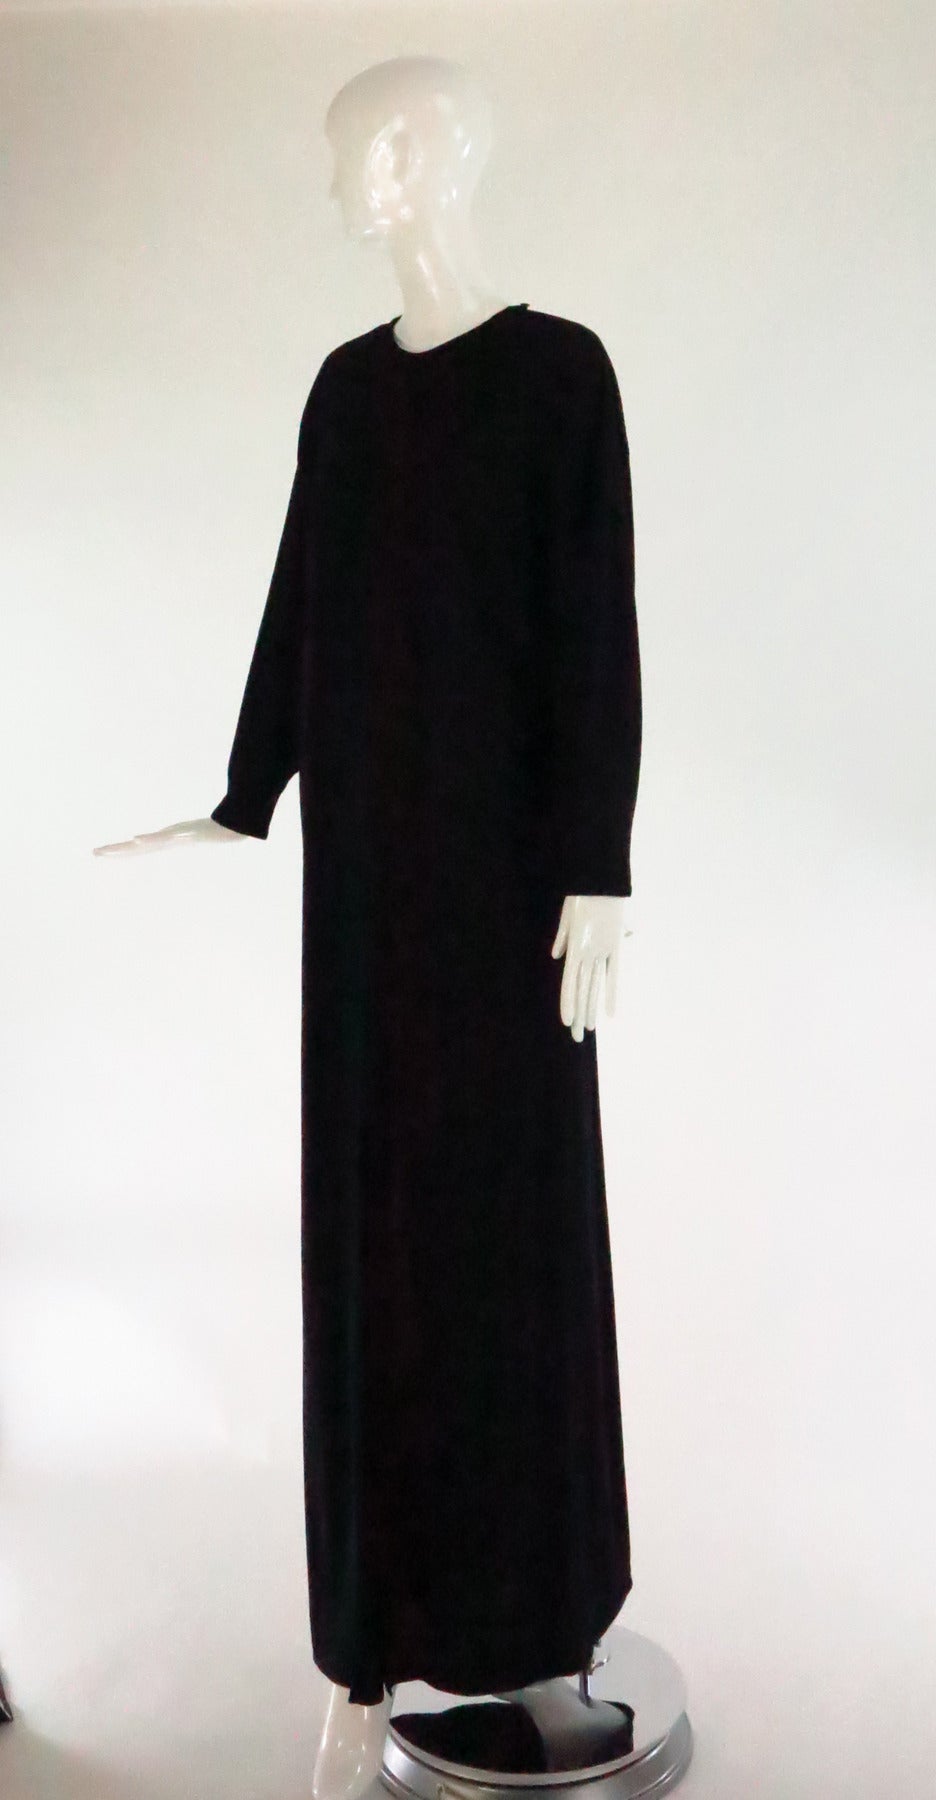 Statement making design from Geoffrey Beene, new with the original tags from the 1970s...Casual maxi dress in fine soft black wool knit...The dress is unlined...Pull on style that closes at each shoulder side with a loop and button...Long dolmen